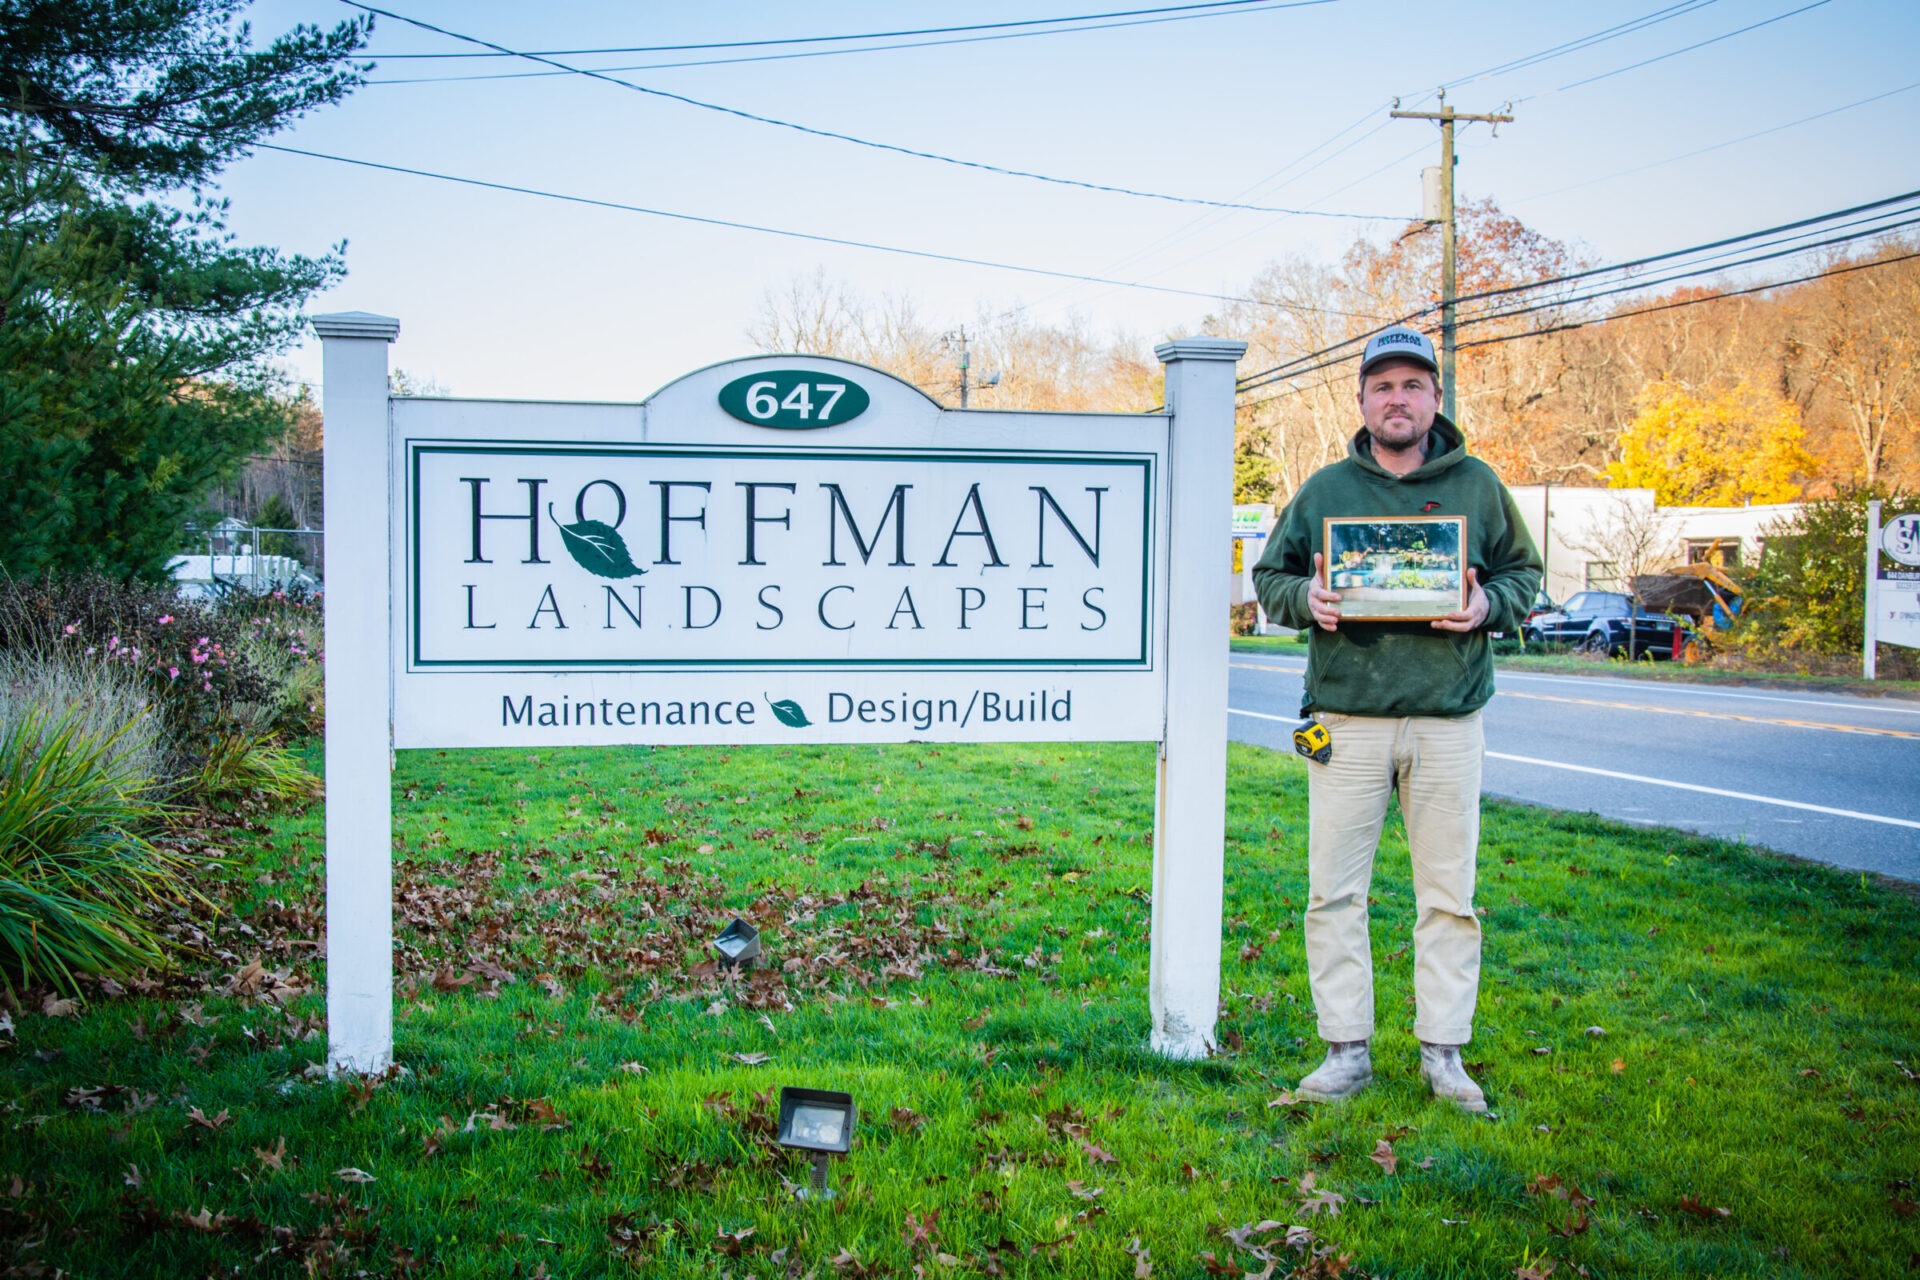 A person stands by a sign reading "HOFFMAN LANDSCAPES" holding a plaque and a measuring tape, on a roadside with greenery and a clear sky.